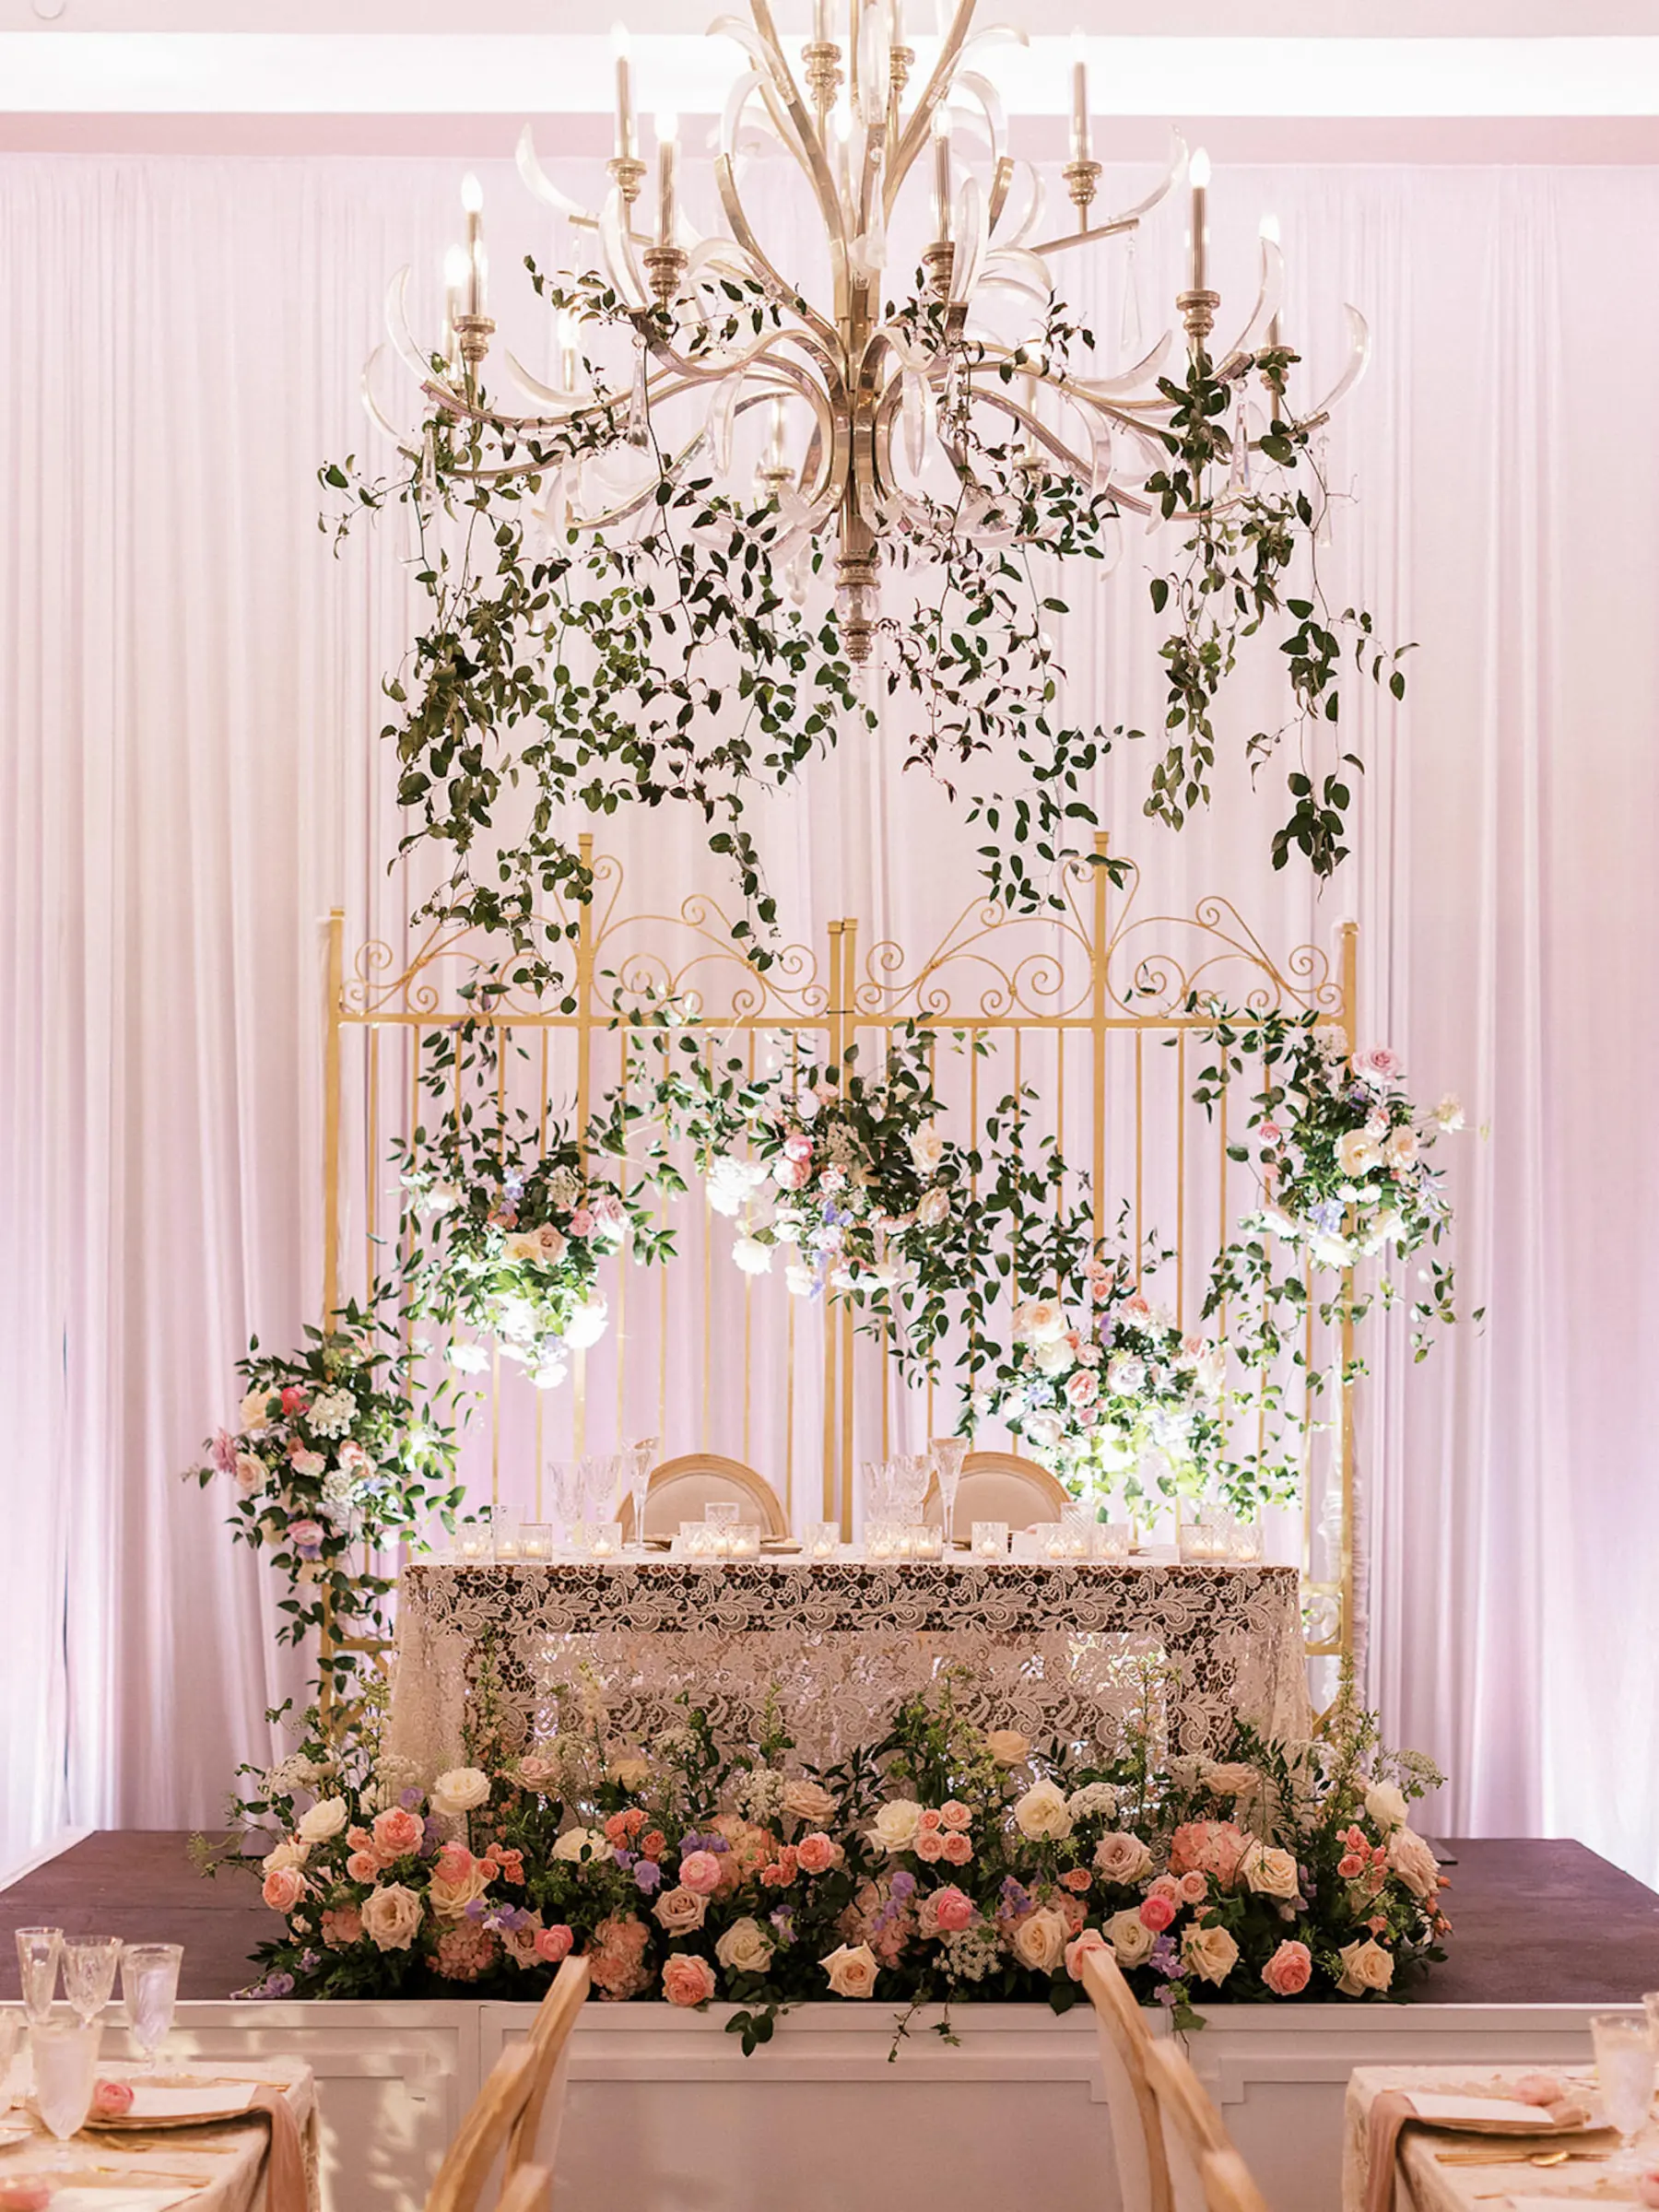 Garden Inspired Bridgerton Wedding Reception Sweetheart Table with Greenery Garland Draping Ideas | Whimsical White and Pink Rose Decor | Lace Tablecloth | White Drapery Backdrop Inspiration | Tampa Bay Staging and Events